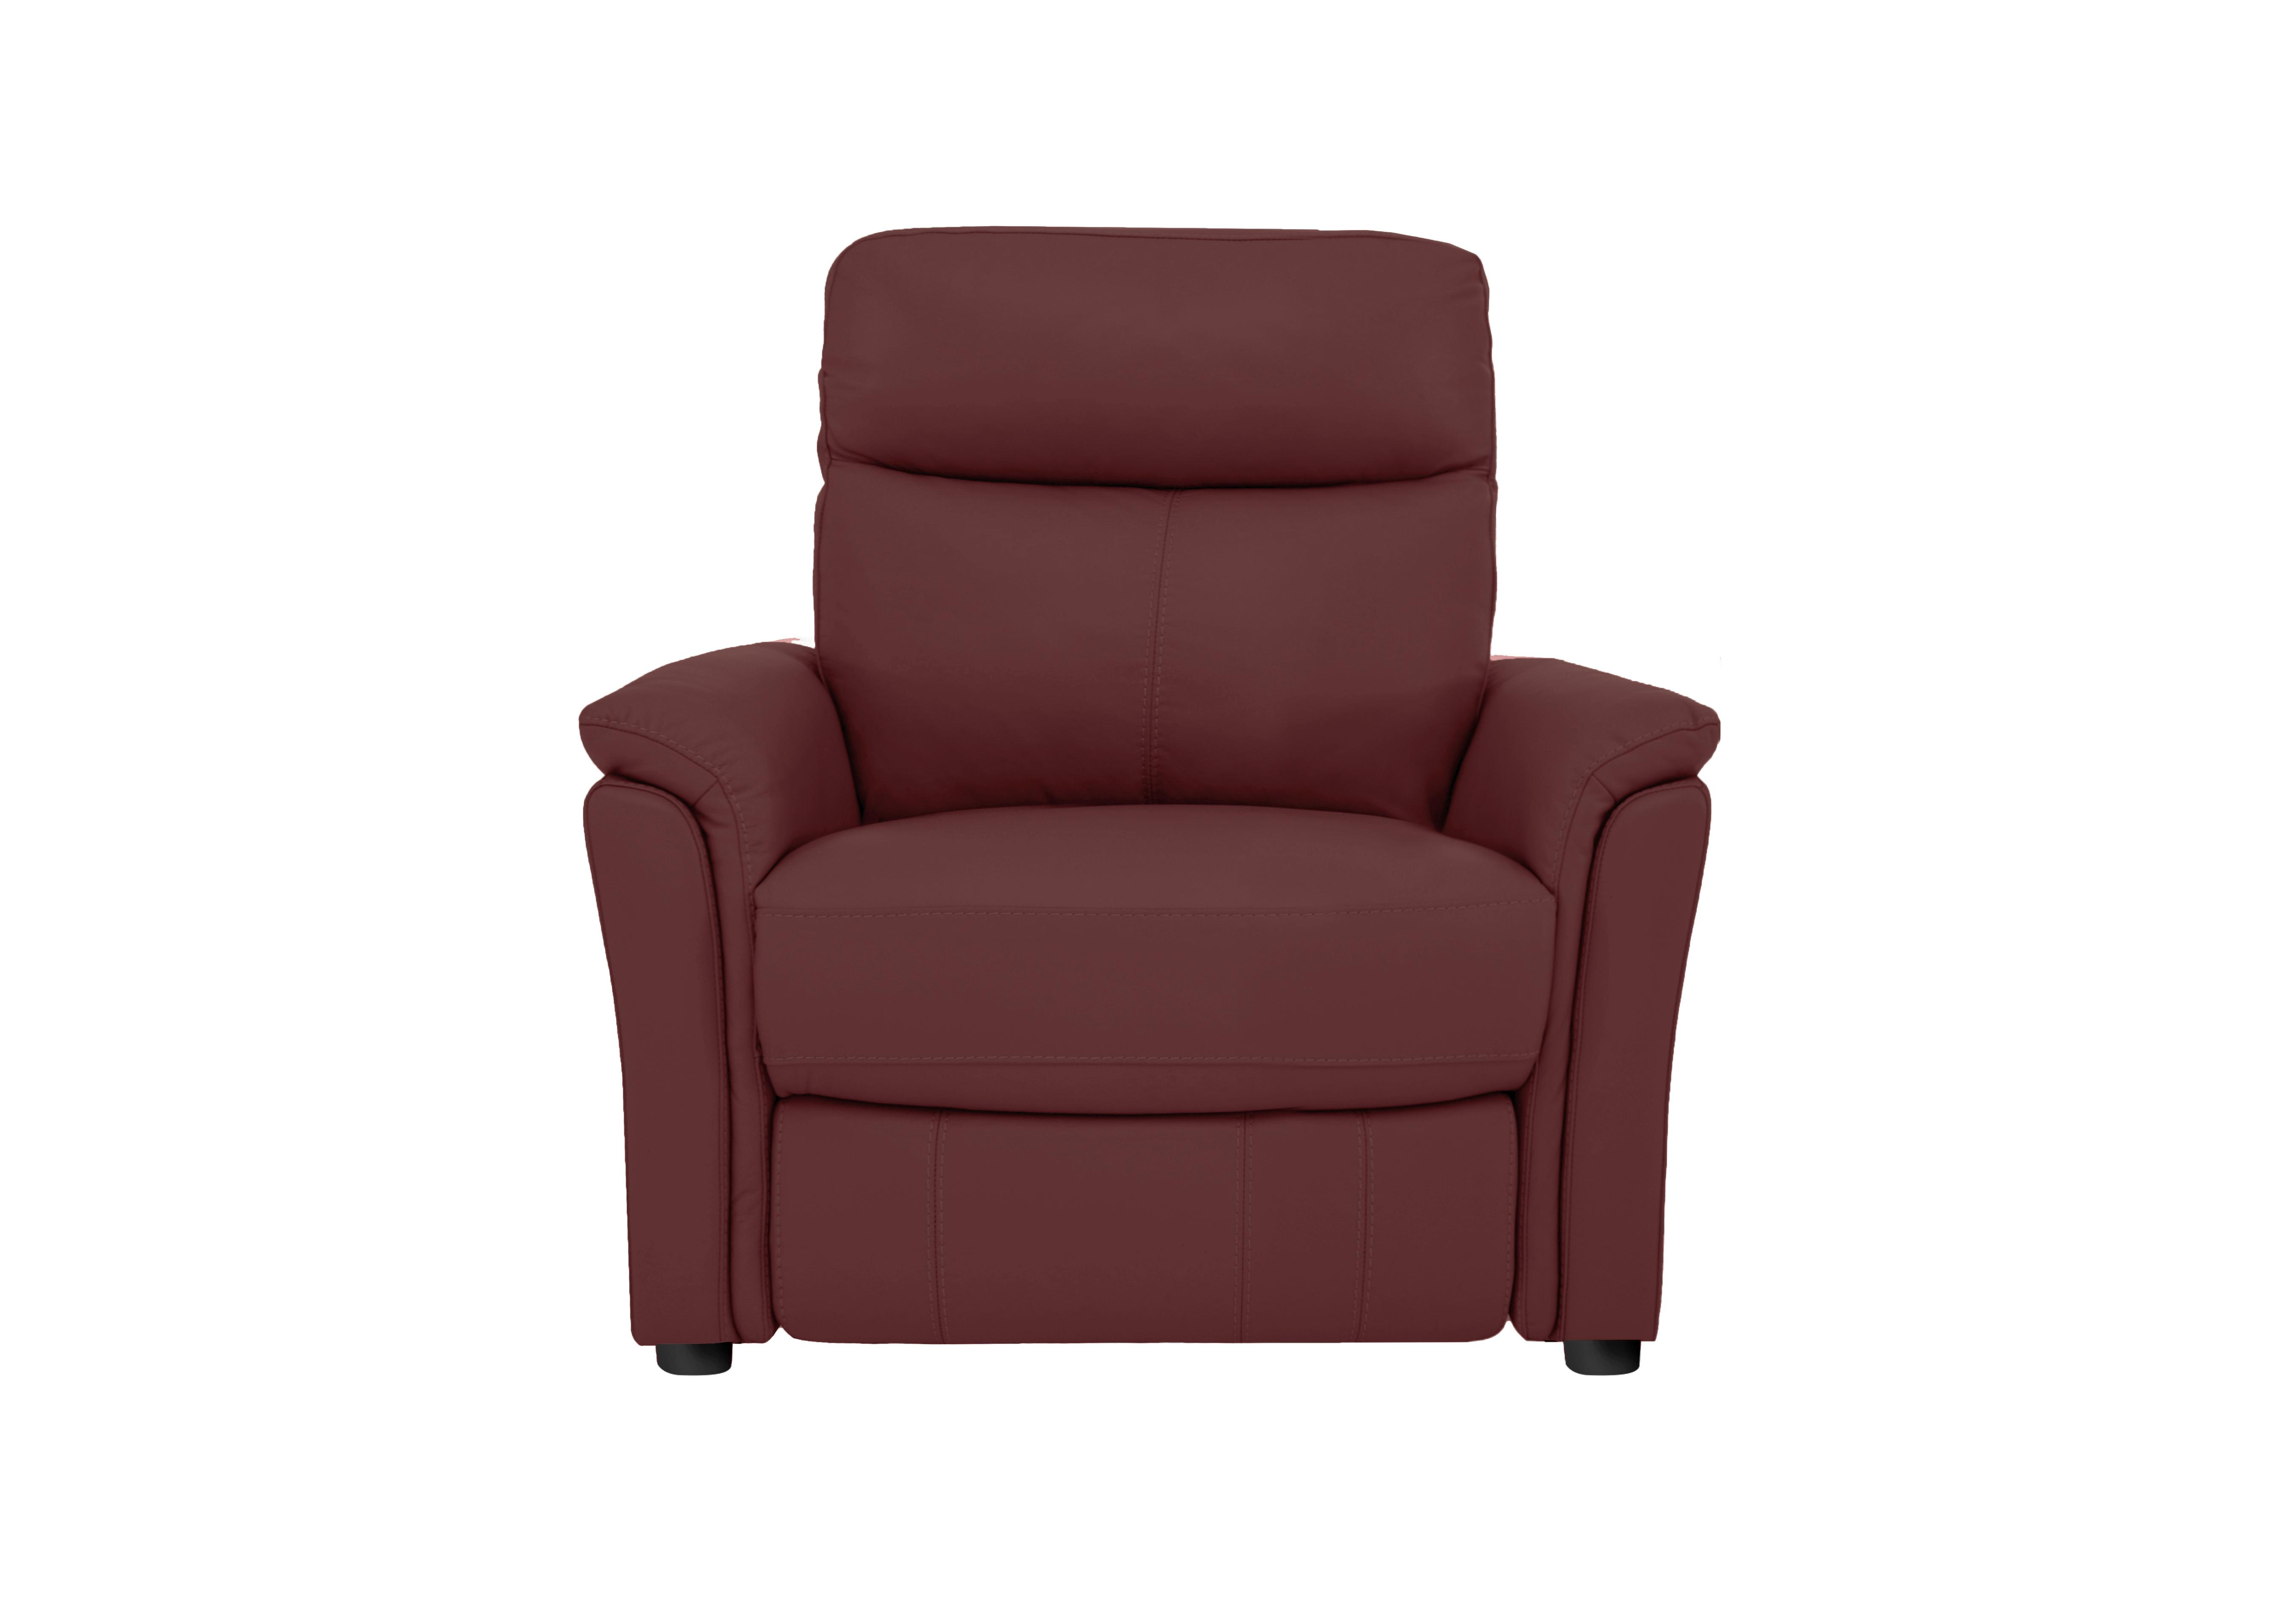 Compact Collection Piccolo Leather Static Armchair in Bv-035c Deep Red on Furniture Village